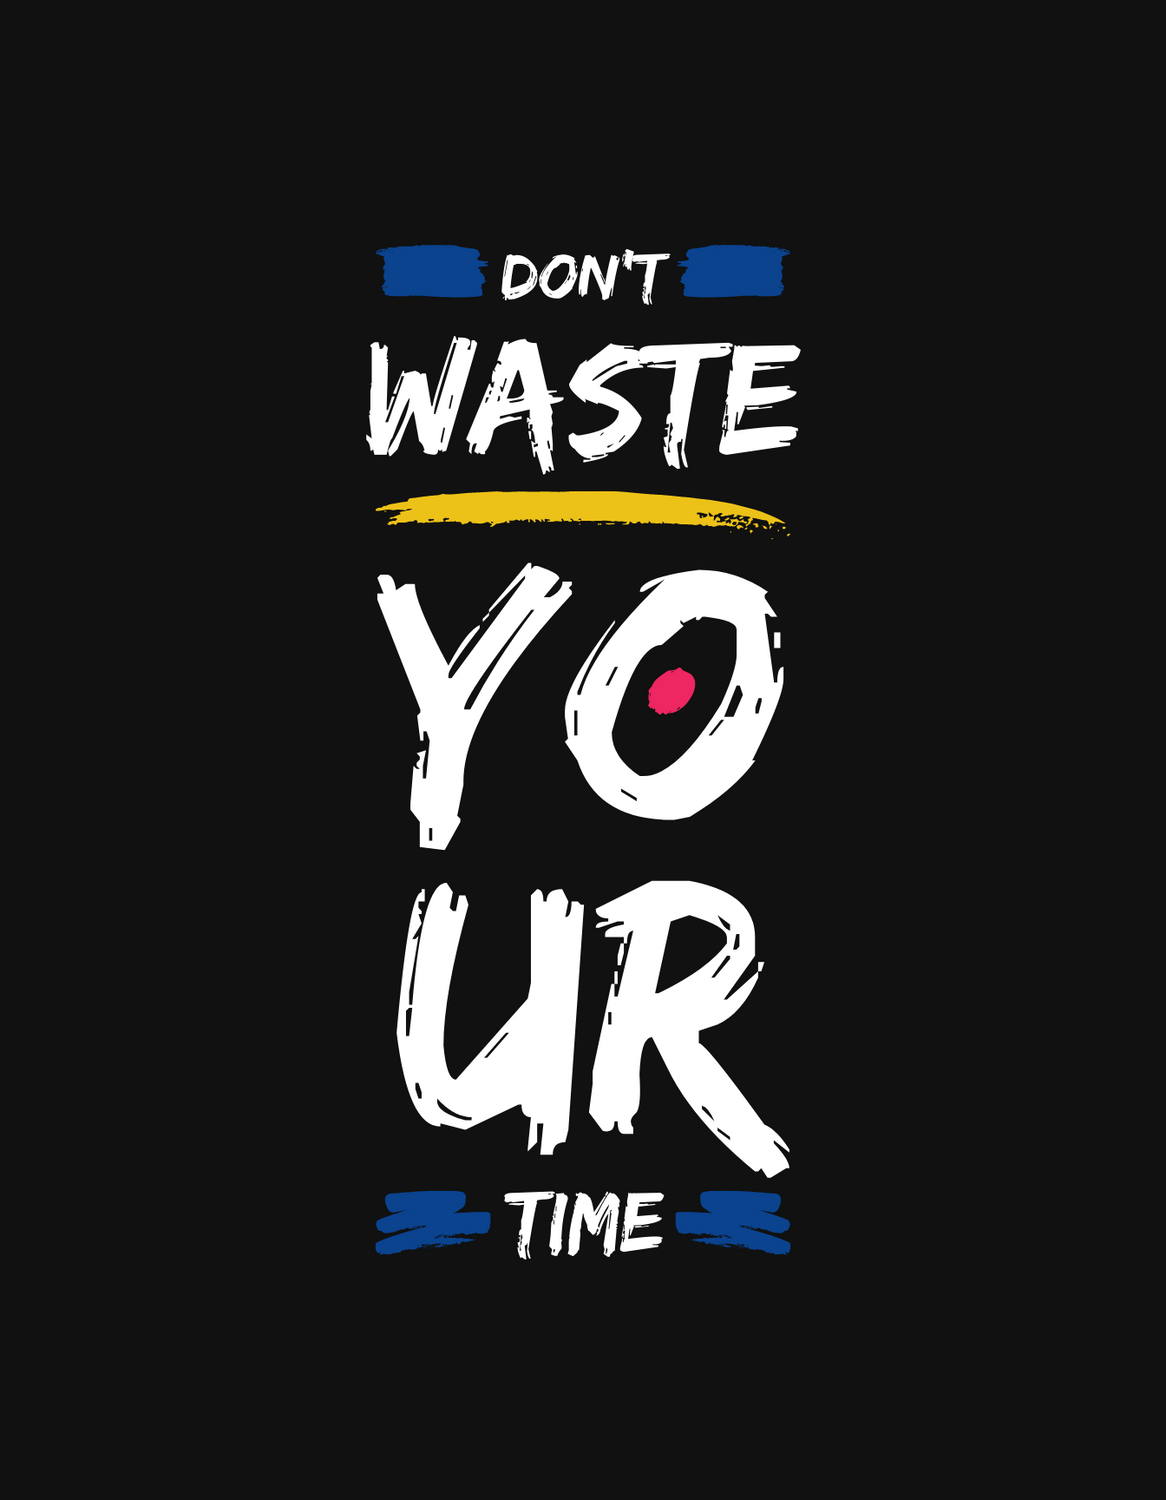 DON'T WASTE YOUR TIME. Inspirational quotes picture, Design quotes inspiration, Work motivational quotes